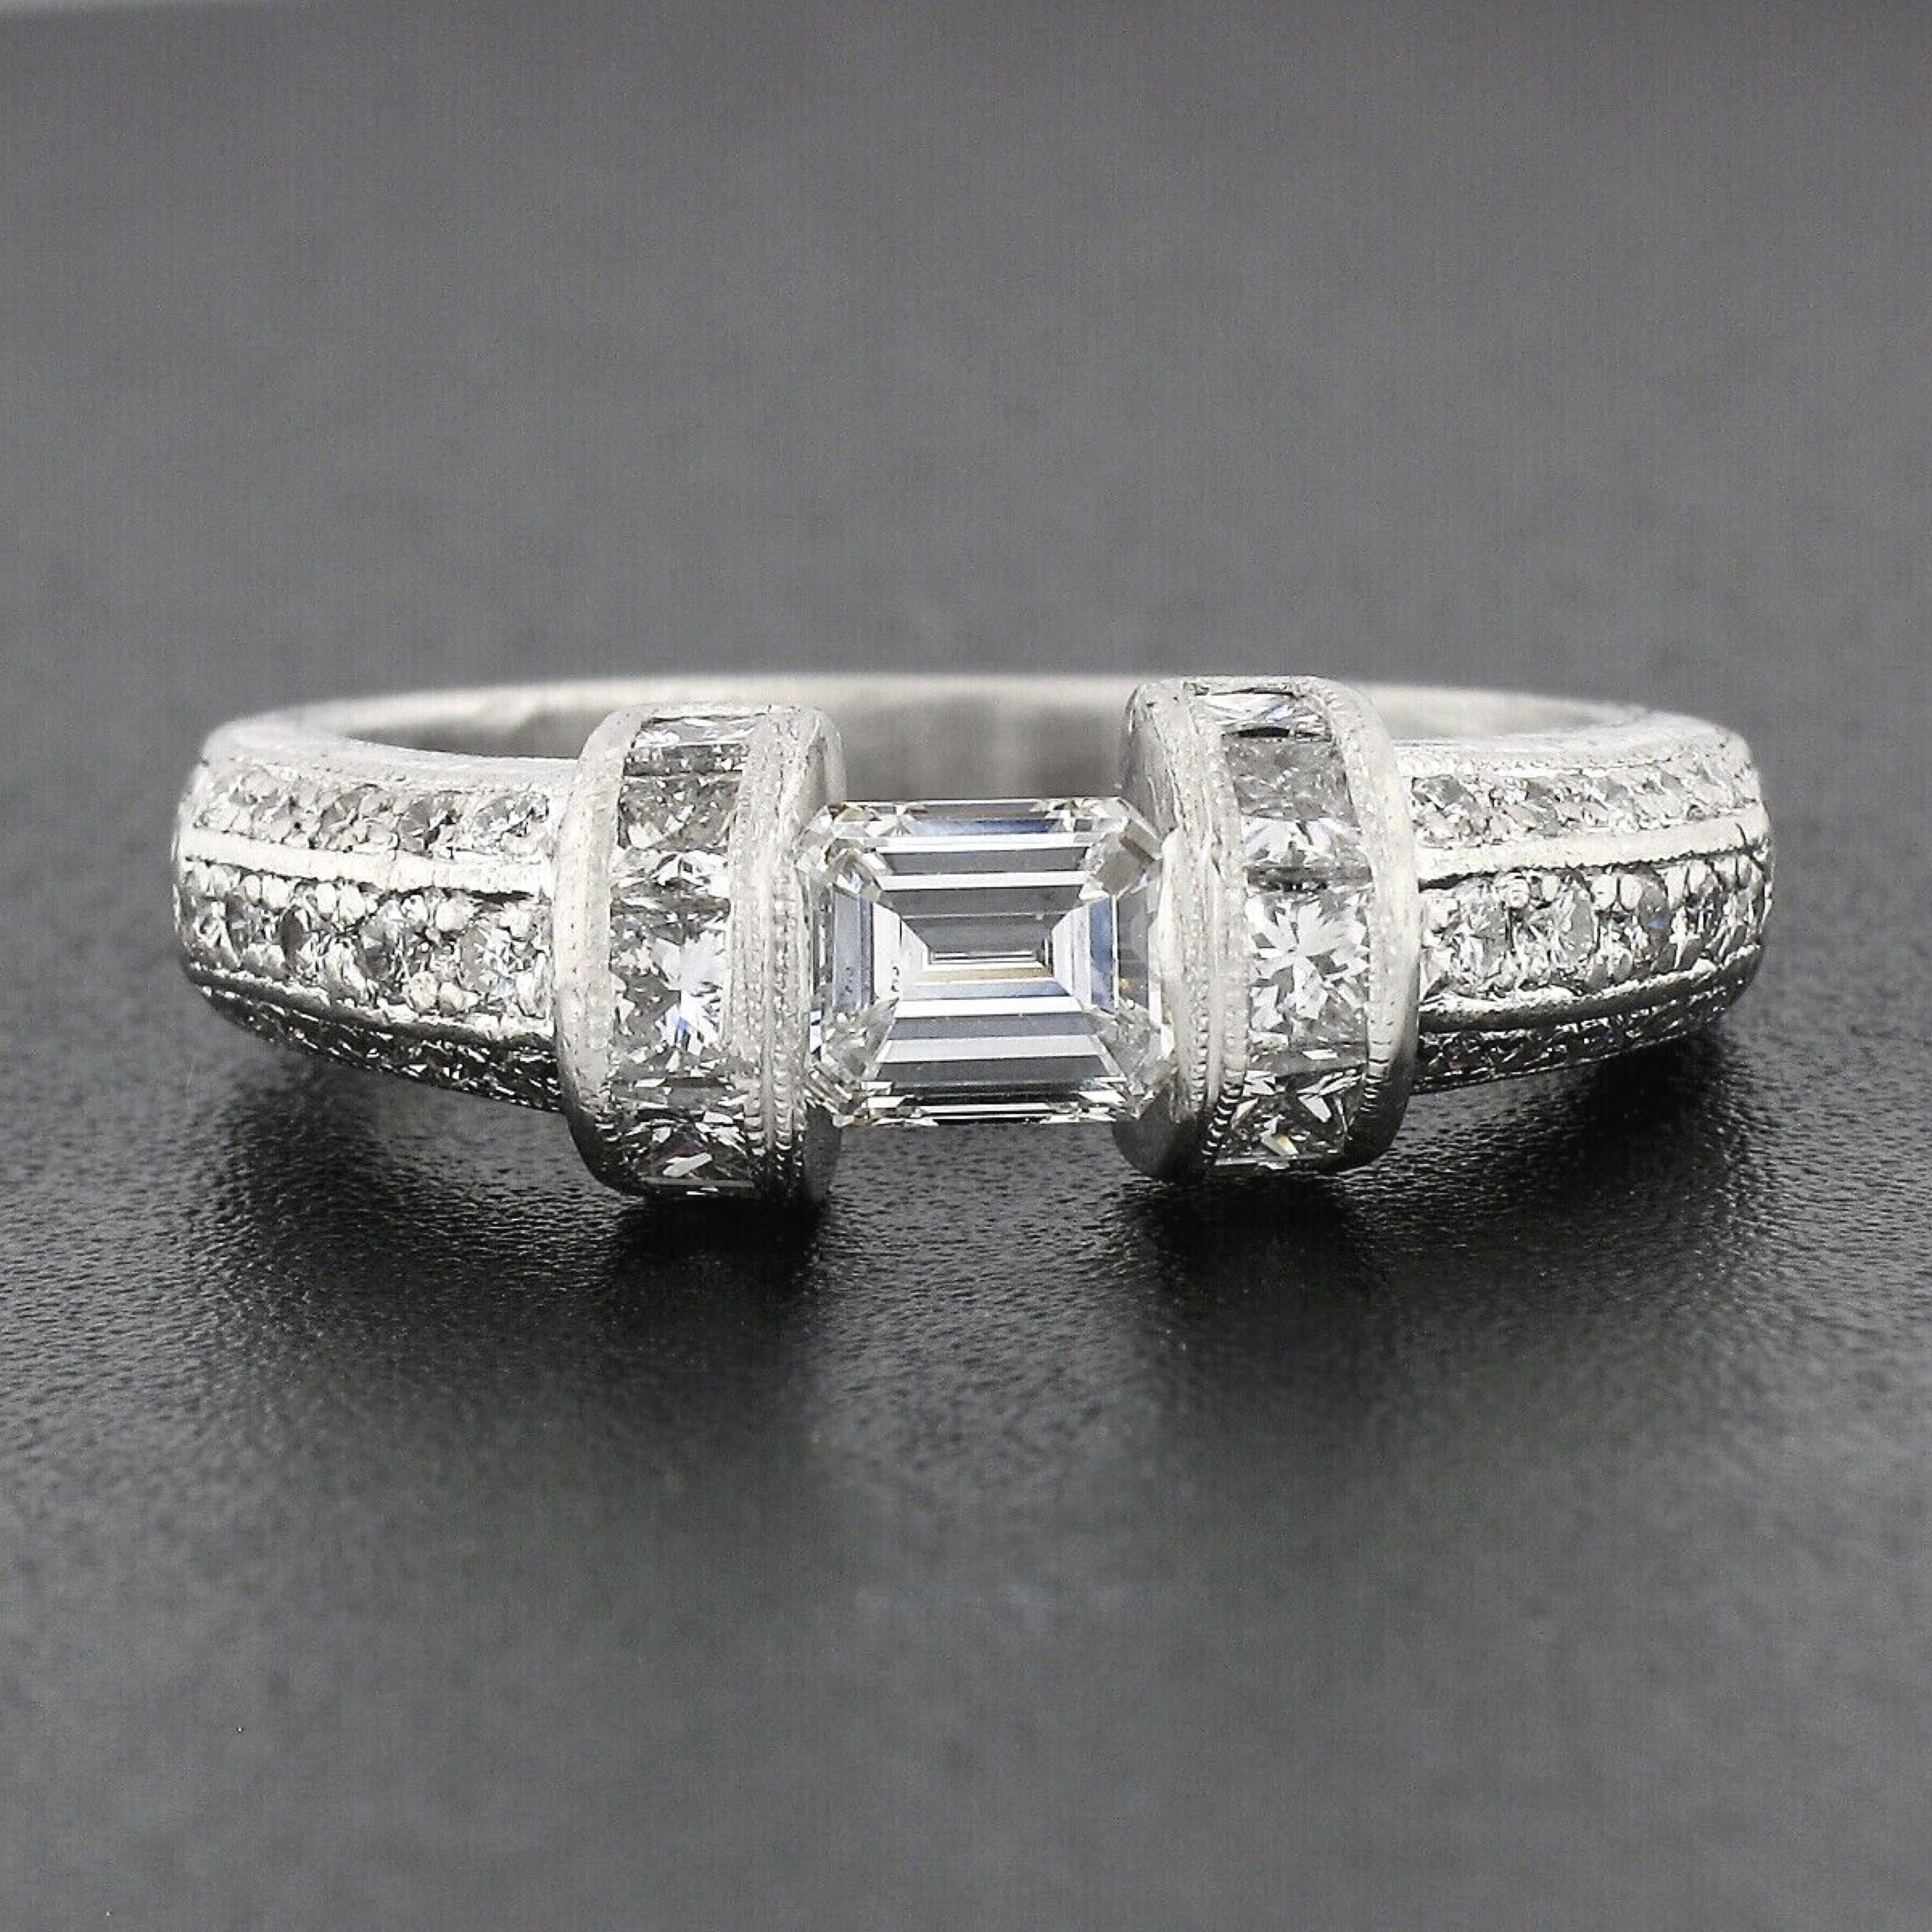 You are looking at a stunning vintage band ring crafted from .900 solid platinum featuring an absolutely incredible floating diamond at its center. This fine quality emerald cut diamond is tension set creating the floating illusion seen from the